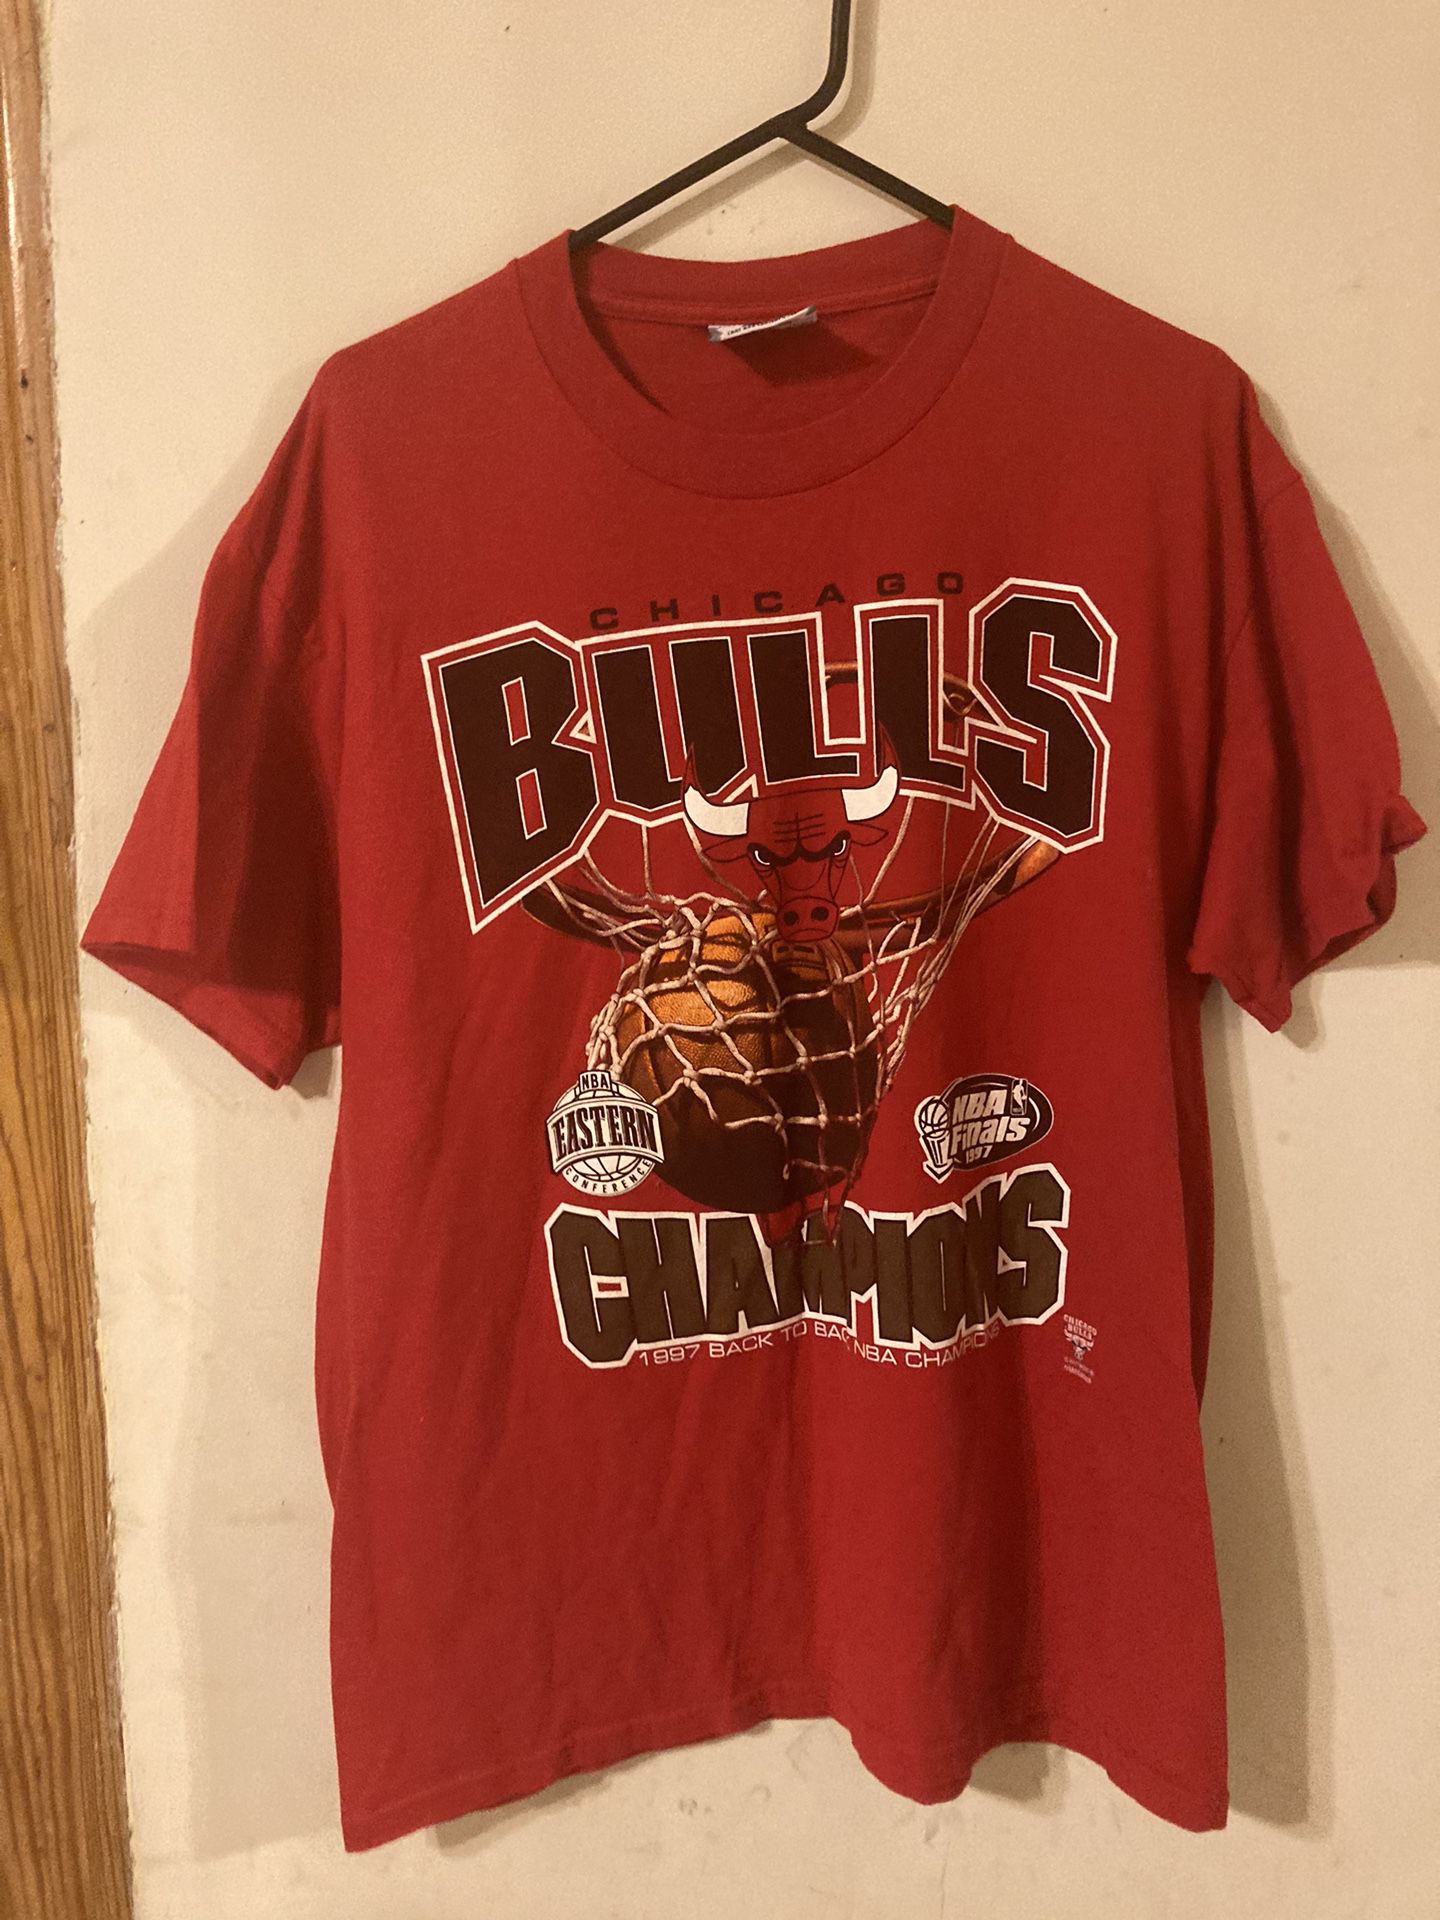 Retro Bulls T Shirt for Sale in Chicago, IL - OfferUp